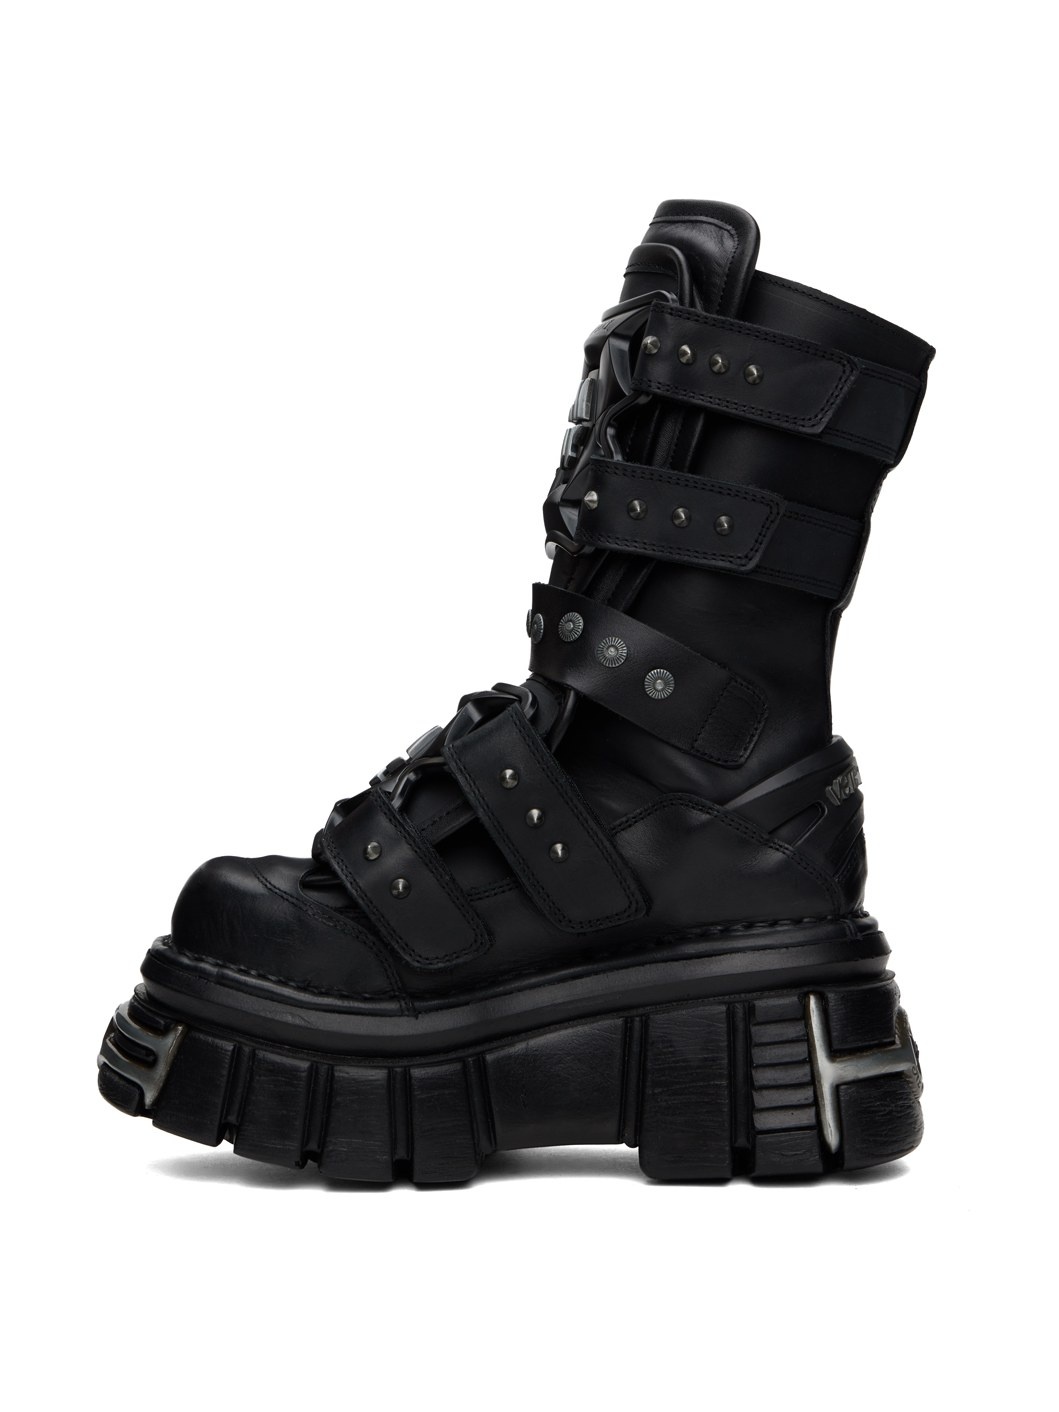 Black New Rock Edition Gamer Boots - 3